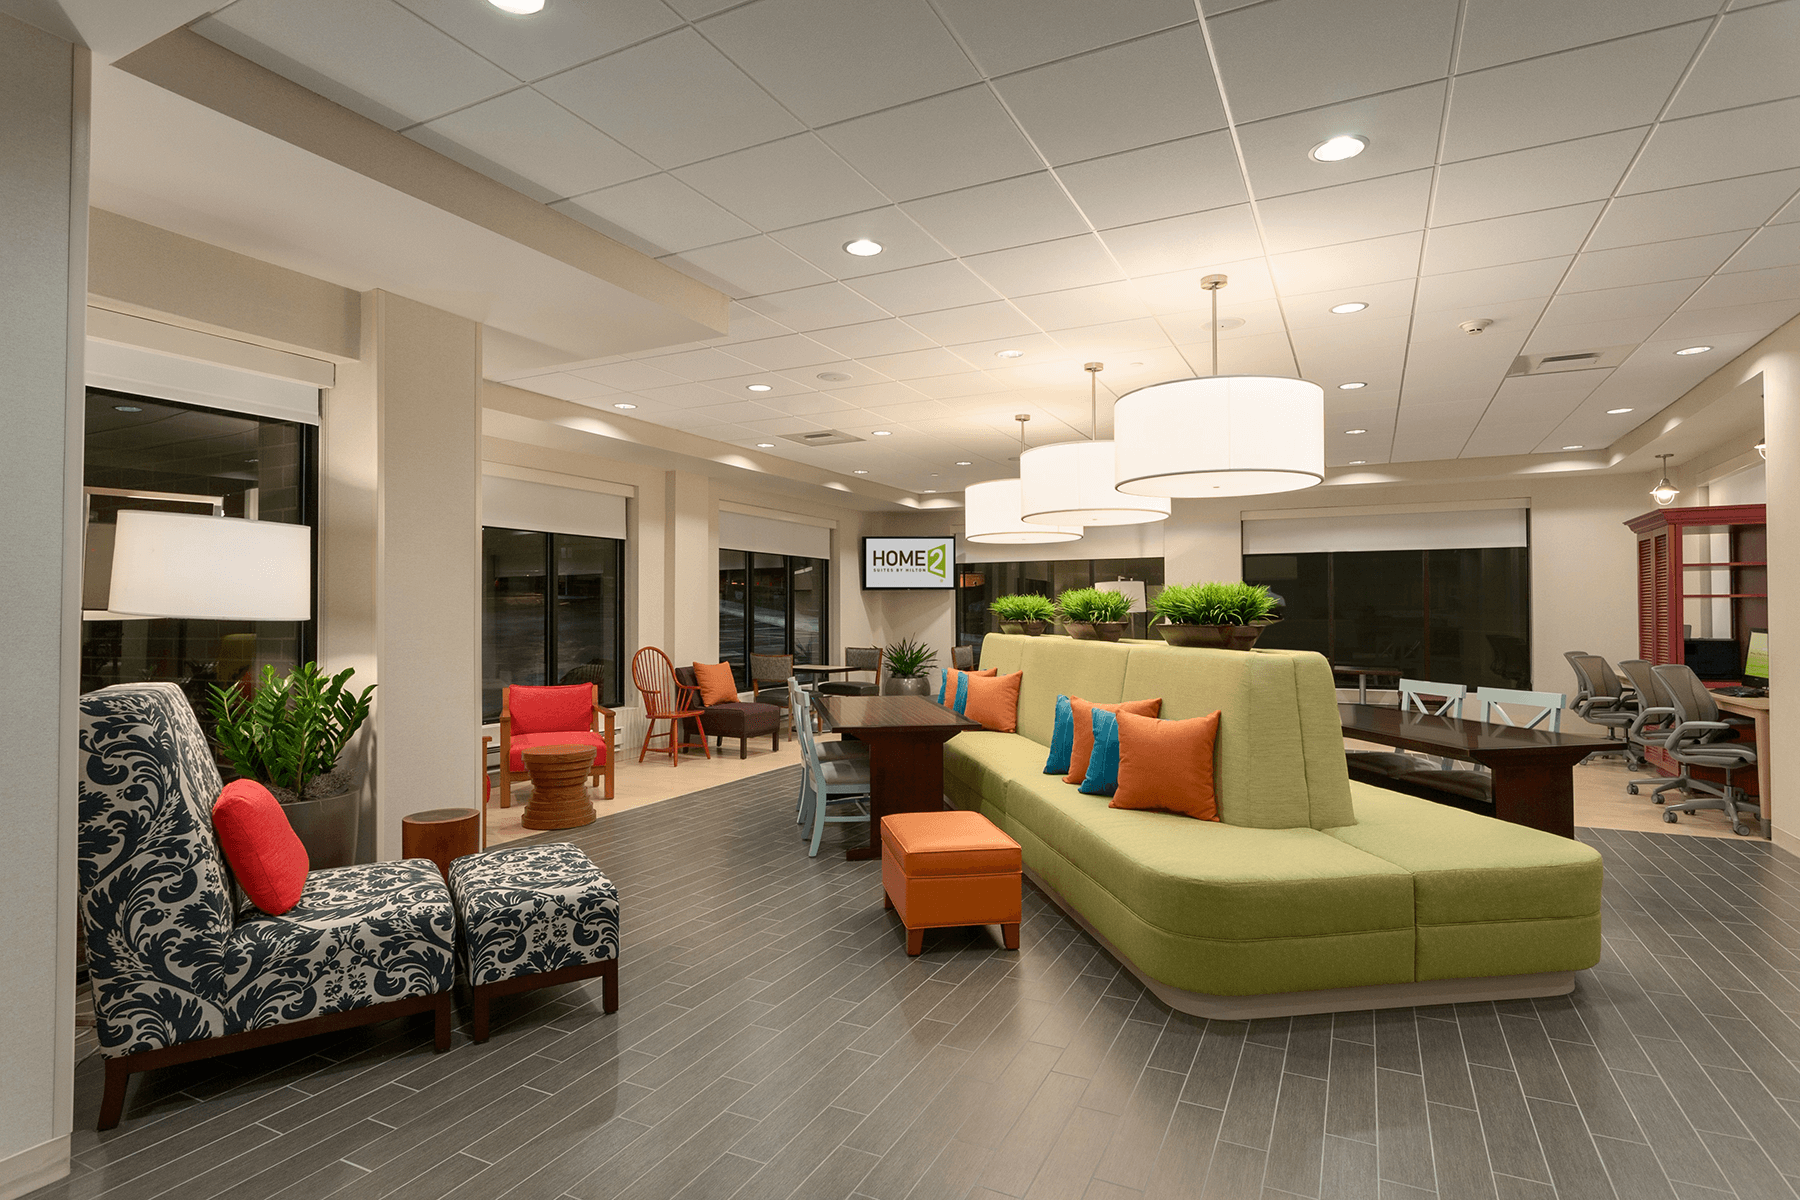  Home 2 Suites Oasis Lobby interior 